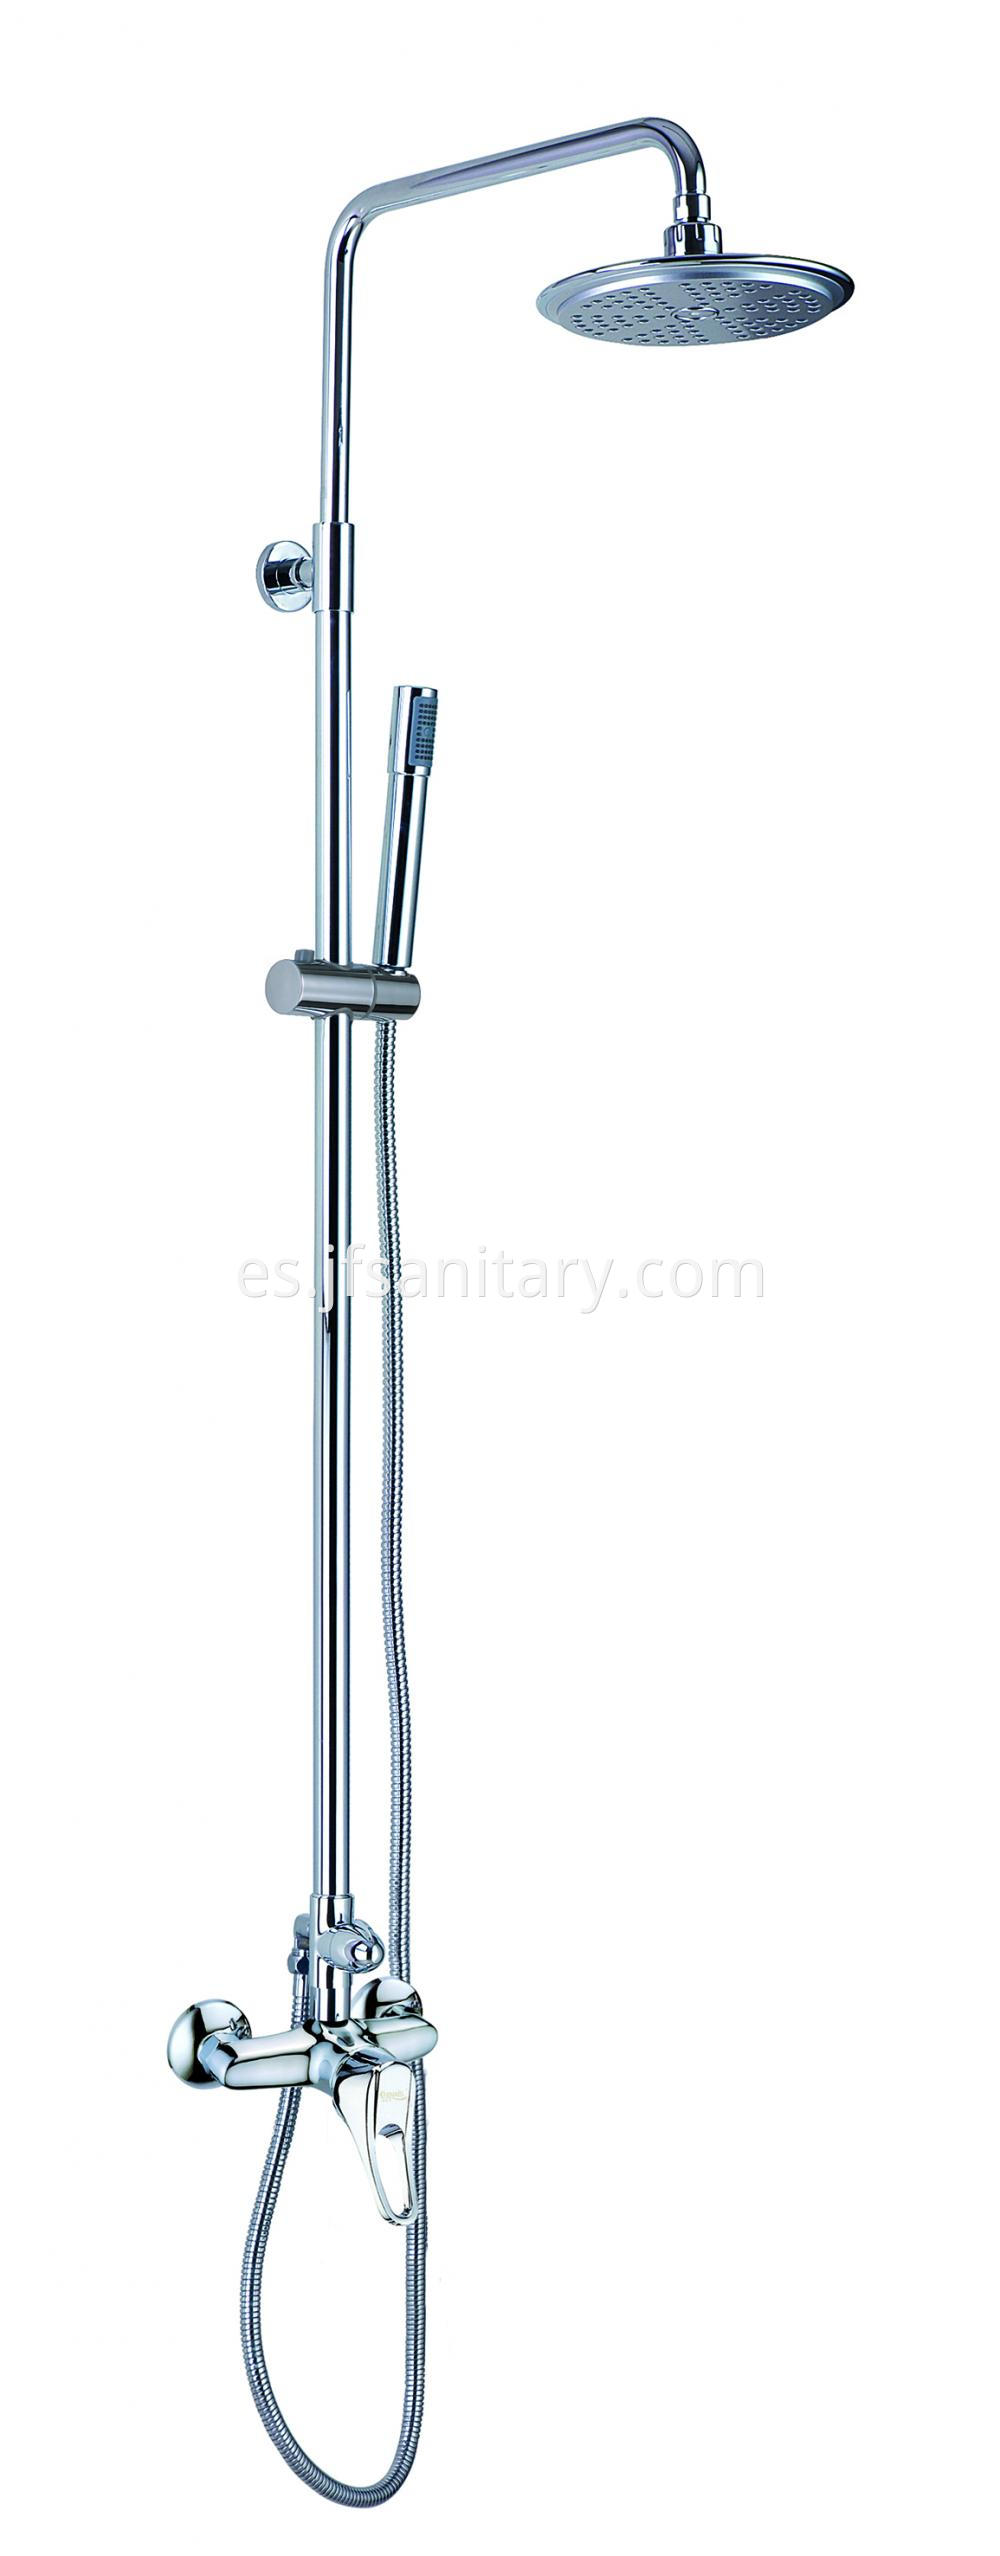 bathroom faucet and shower sets